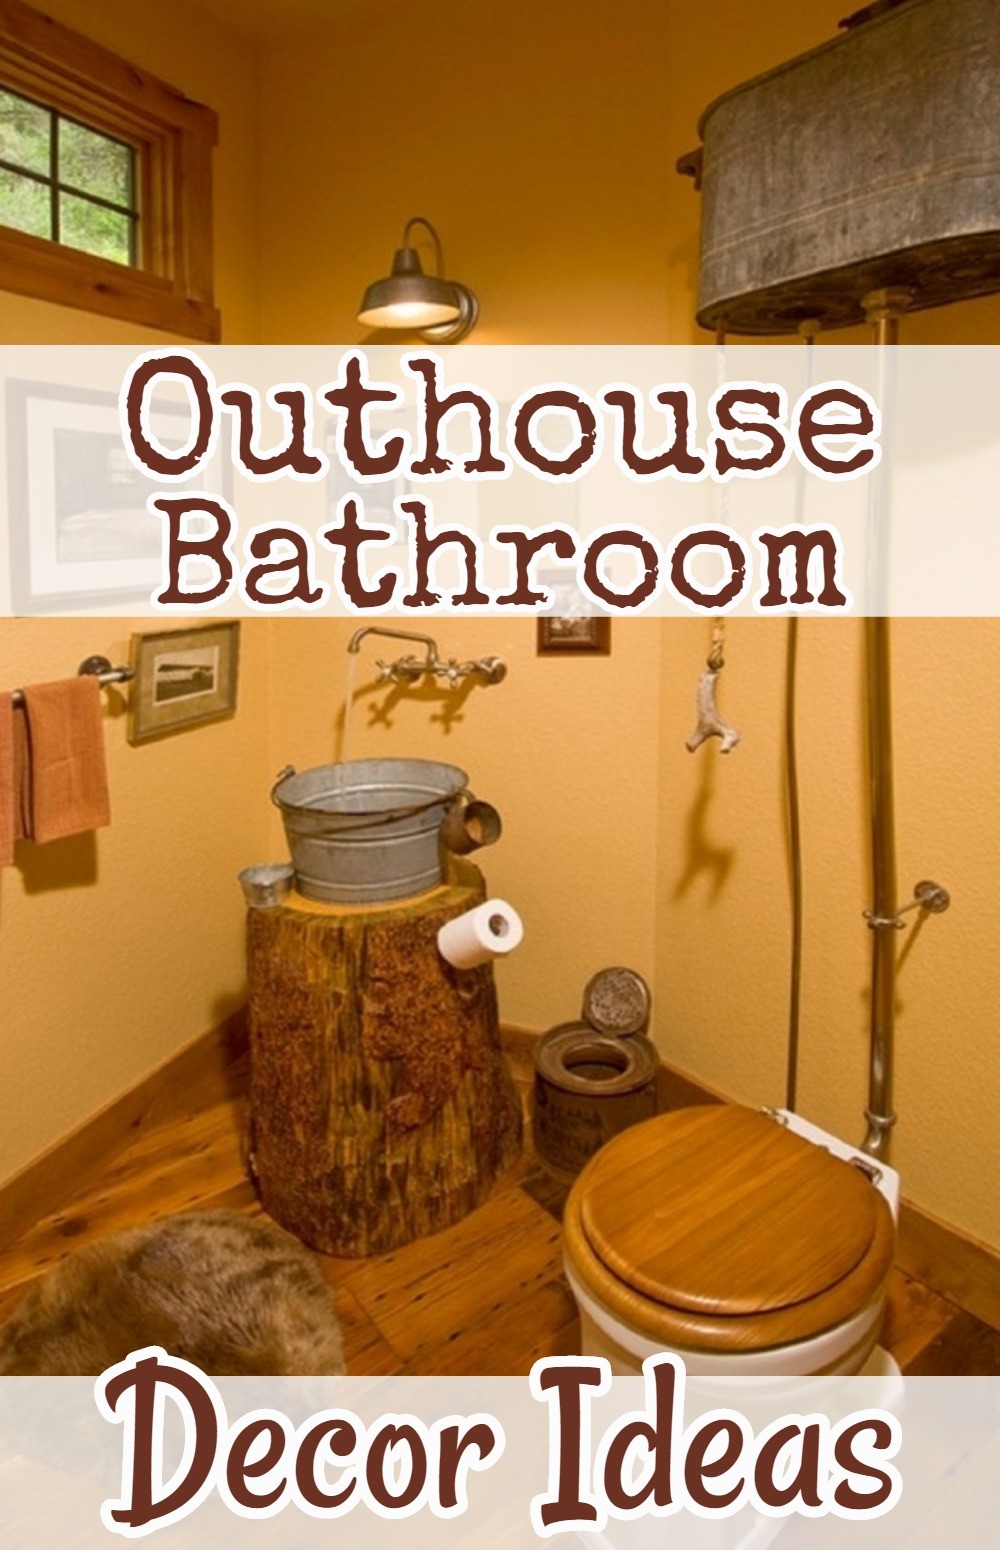 Country Outhouse Bathroom Decor/Redecorating Ideas